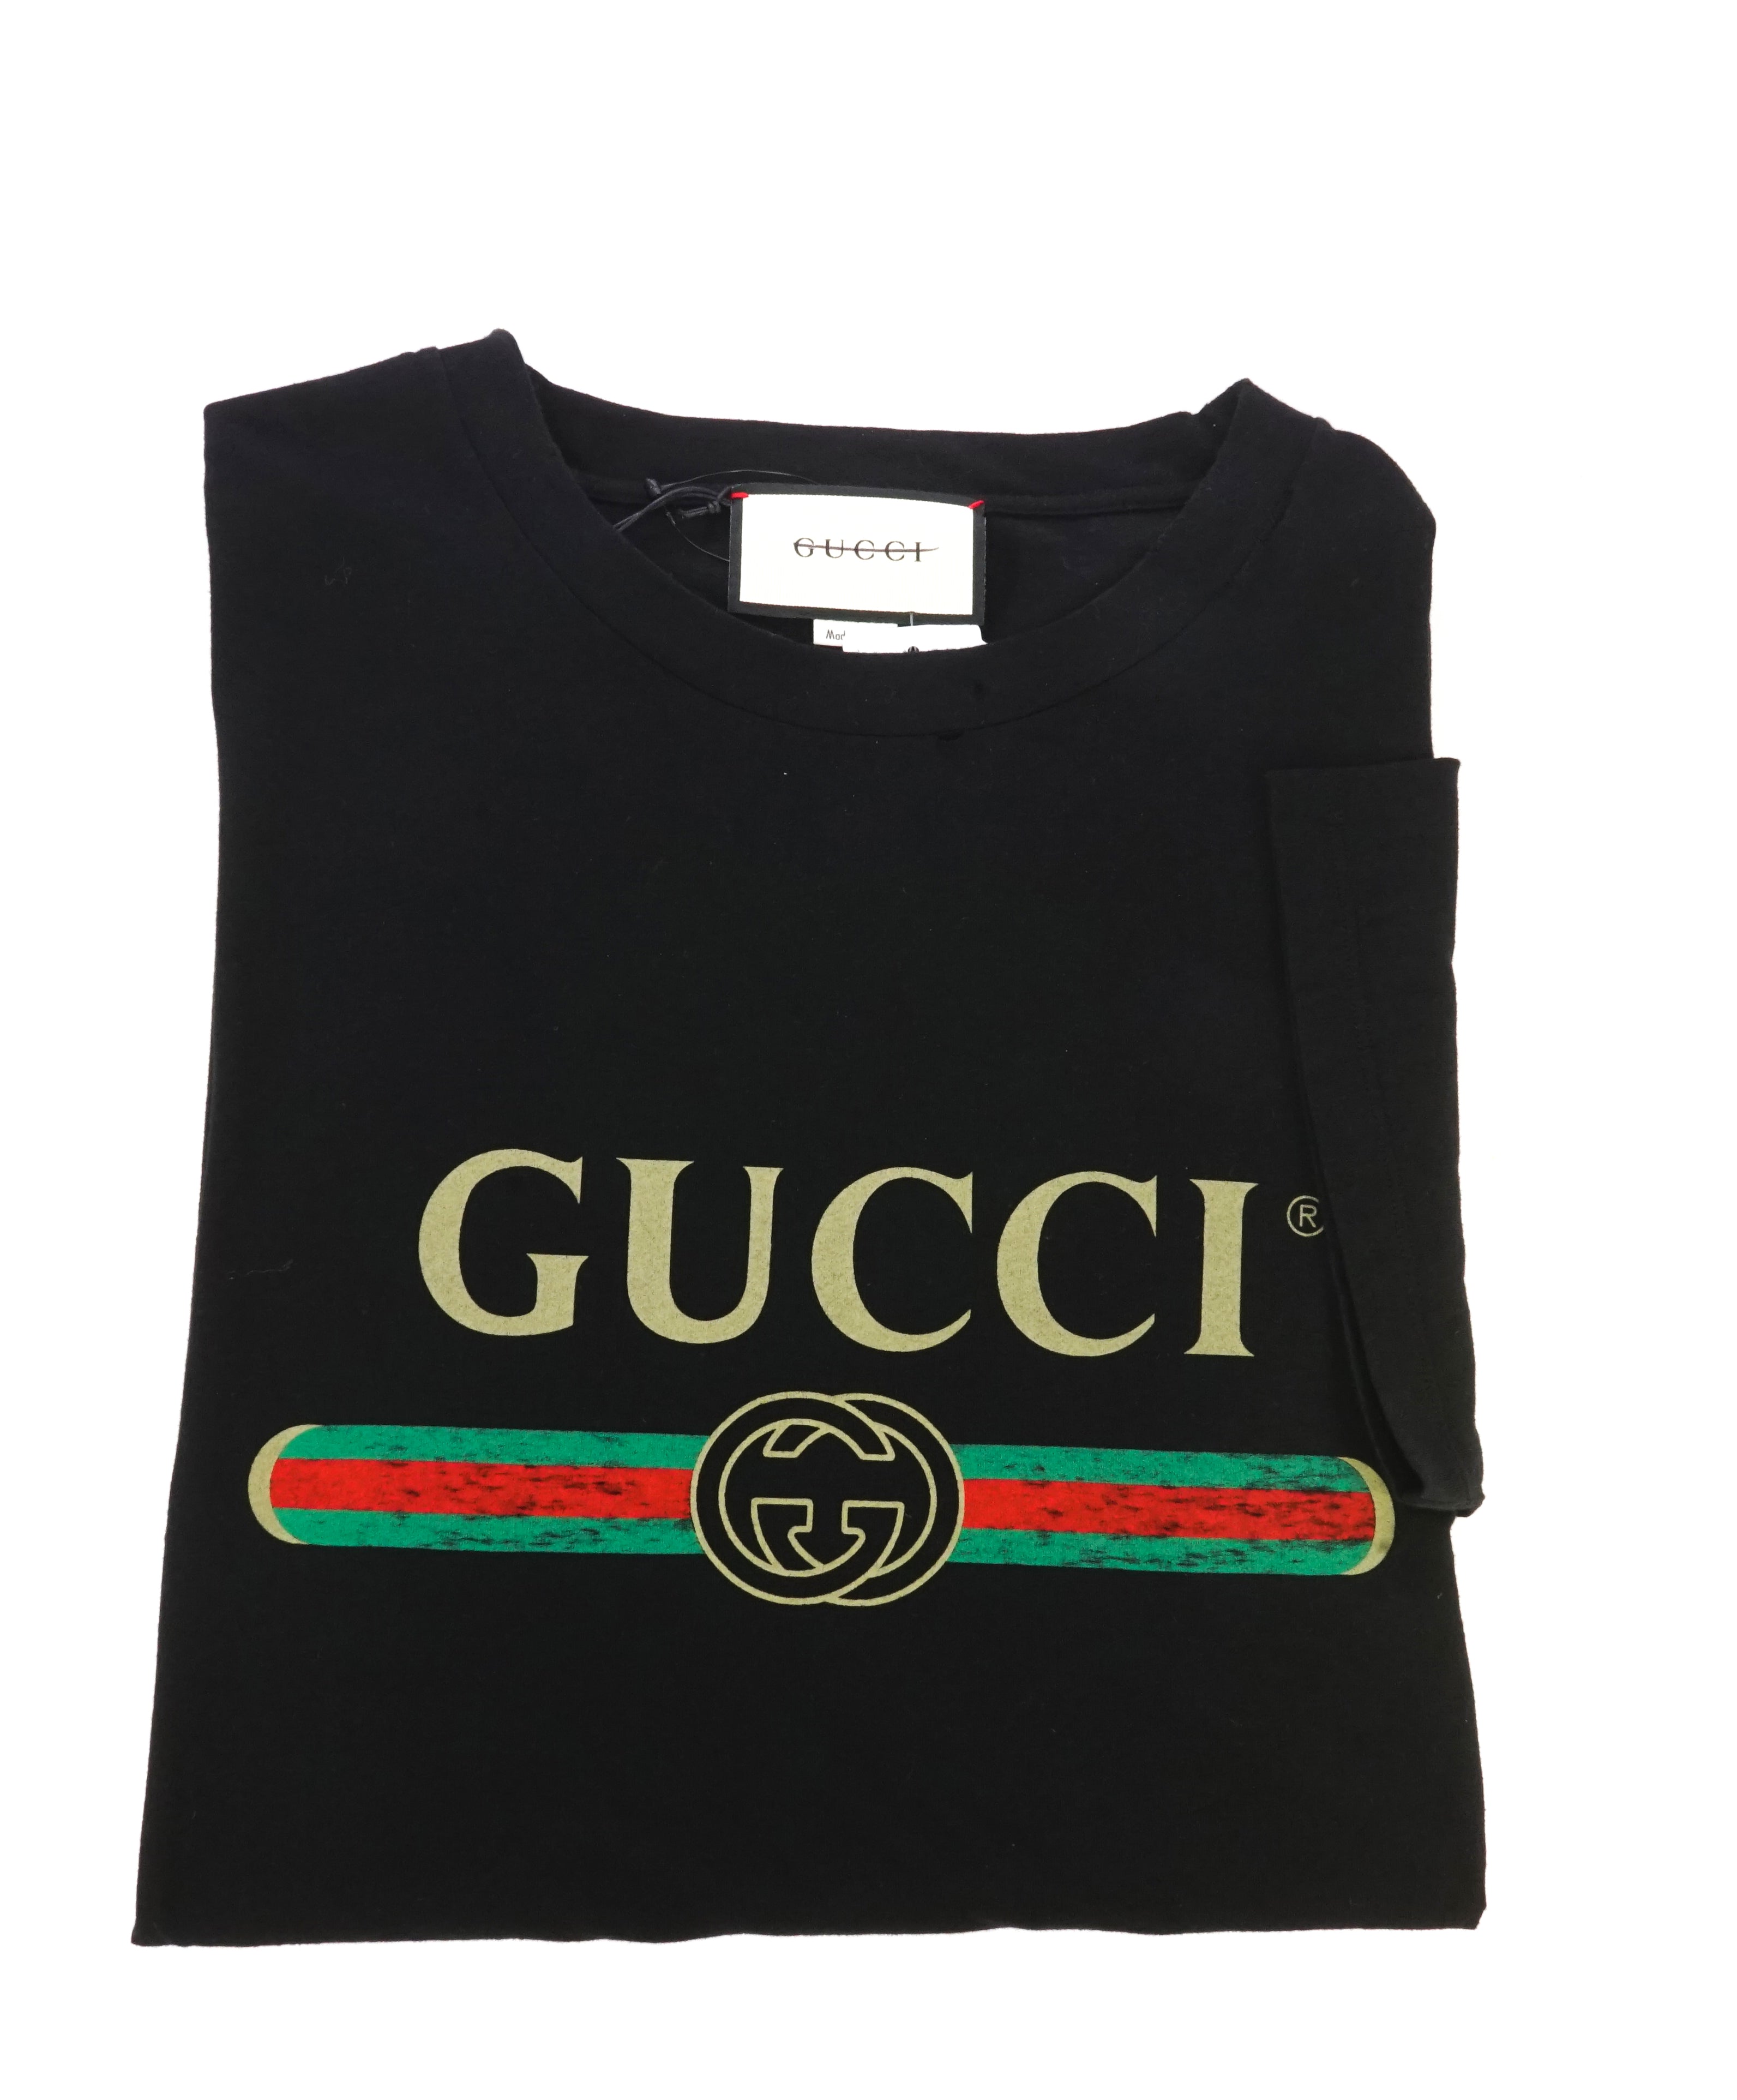 GUCCI - 1980 Vintage Style Oversize T-shirt with Gucci logo - M (Overs ...